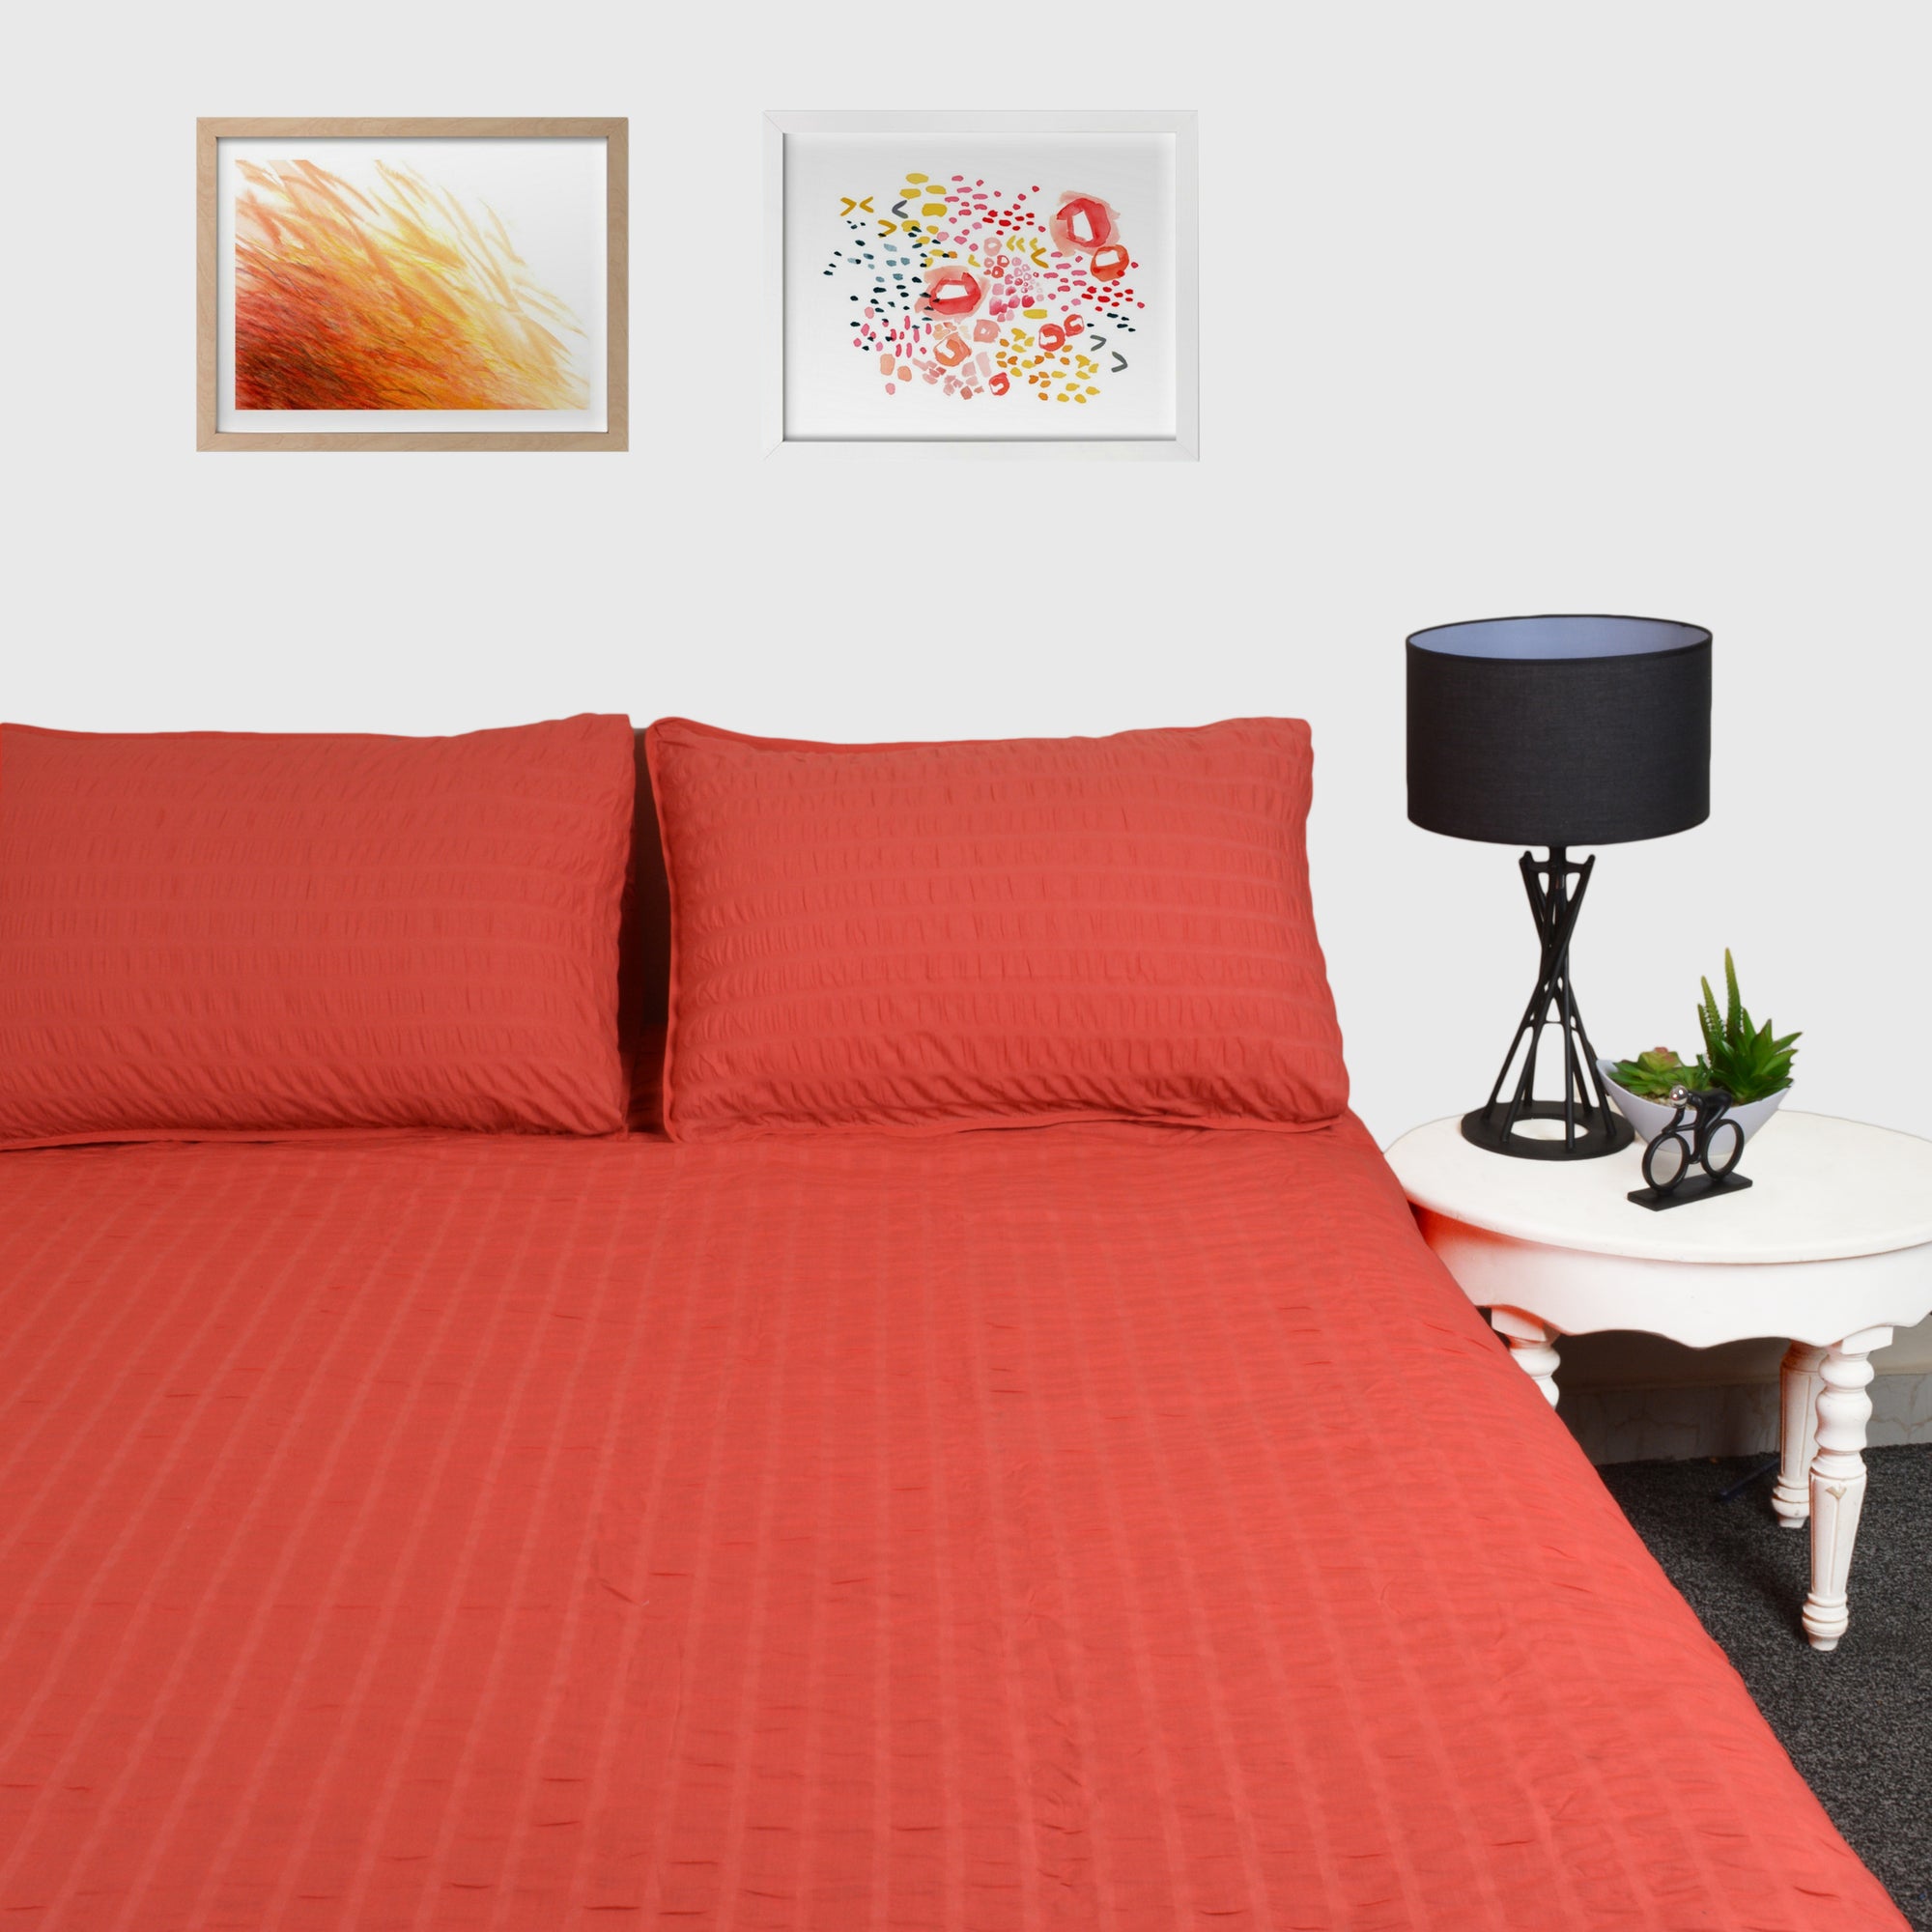 Soft Cotton Red Duvet Covers with Pillowcases